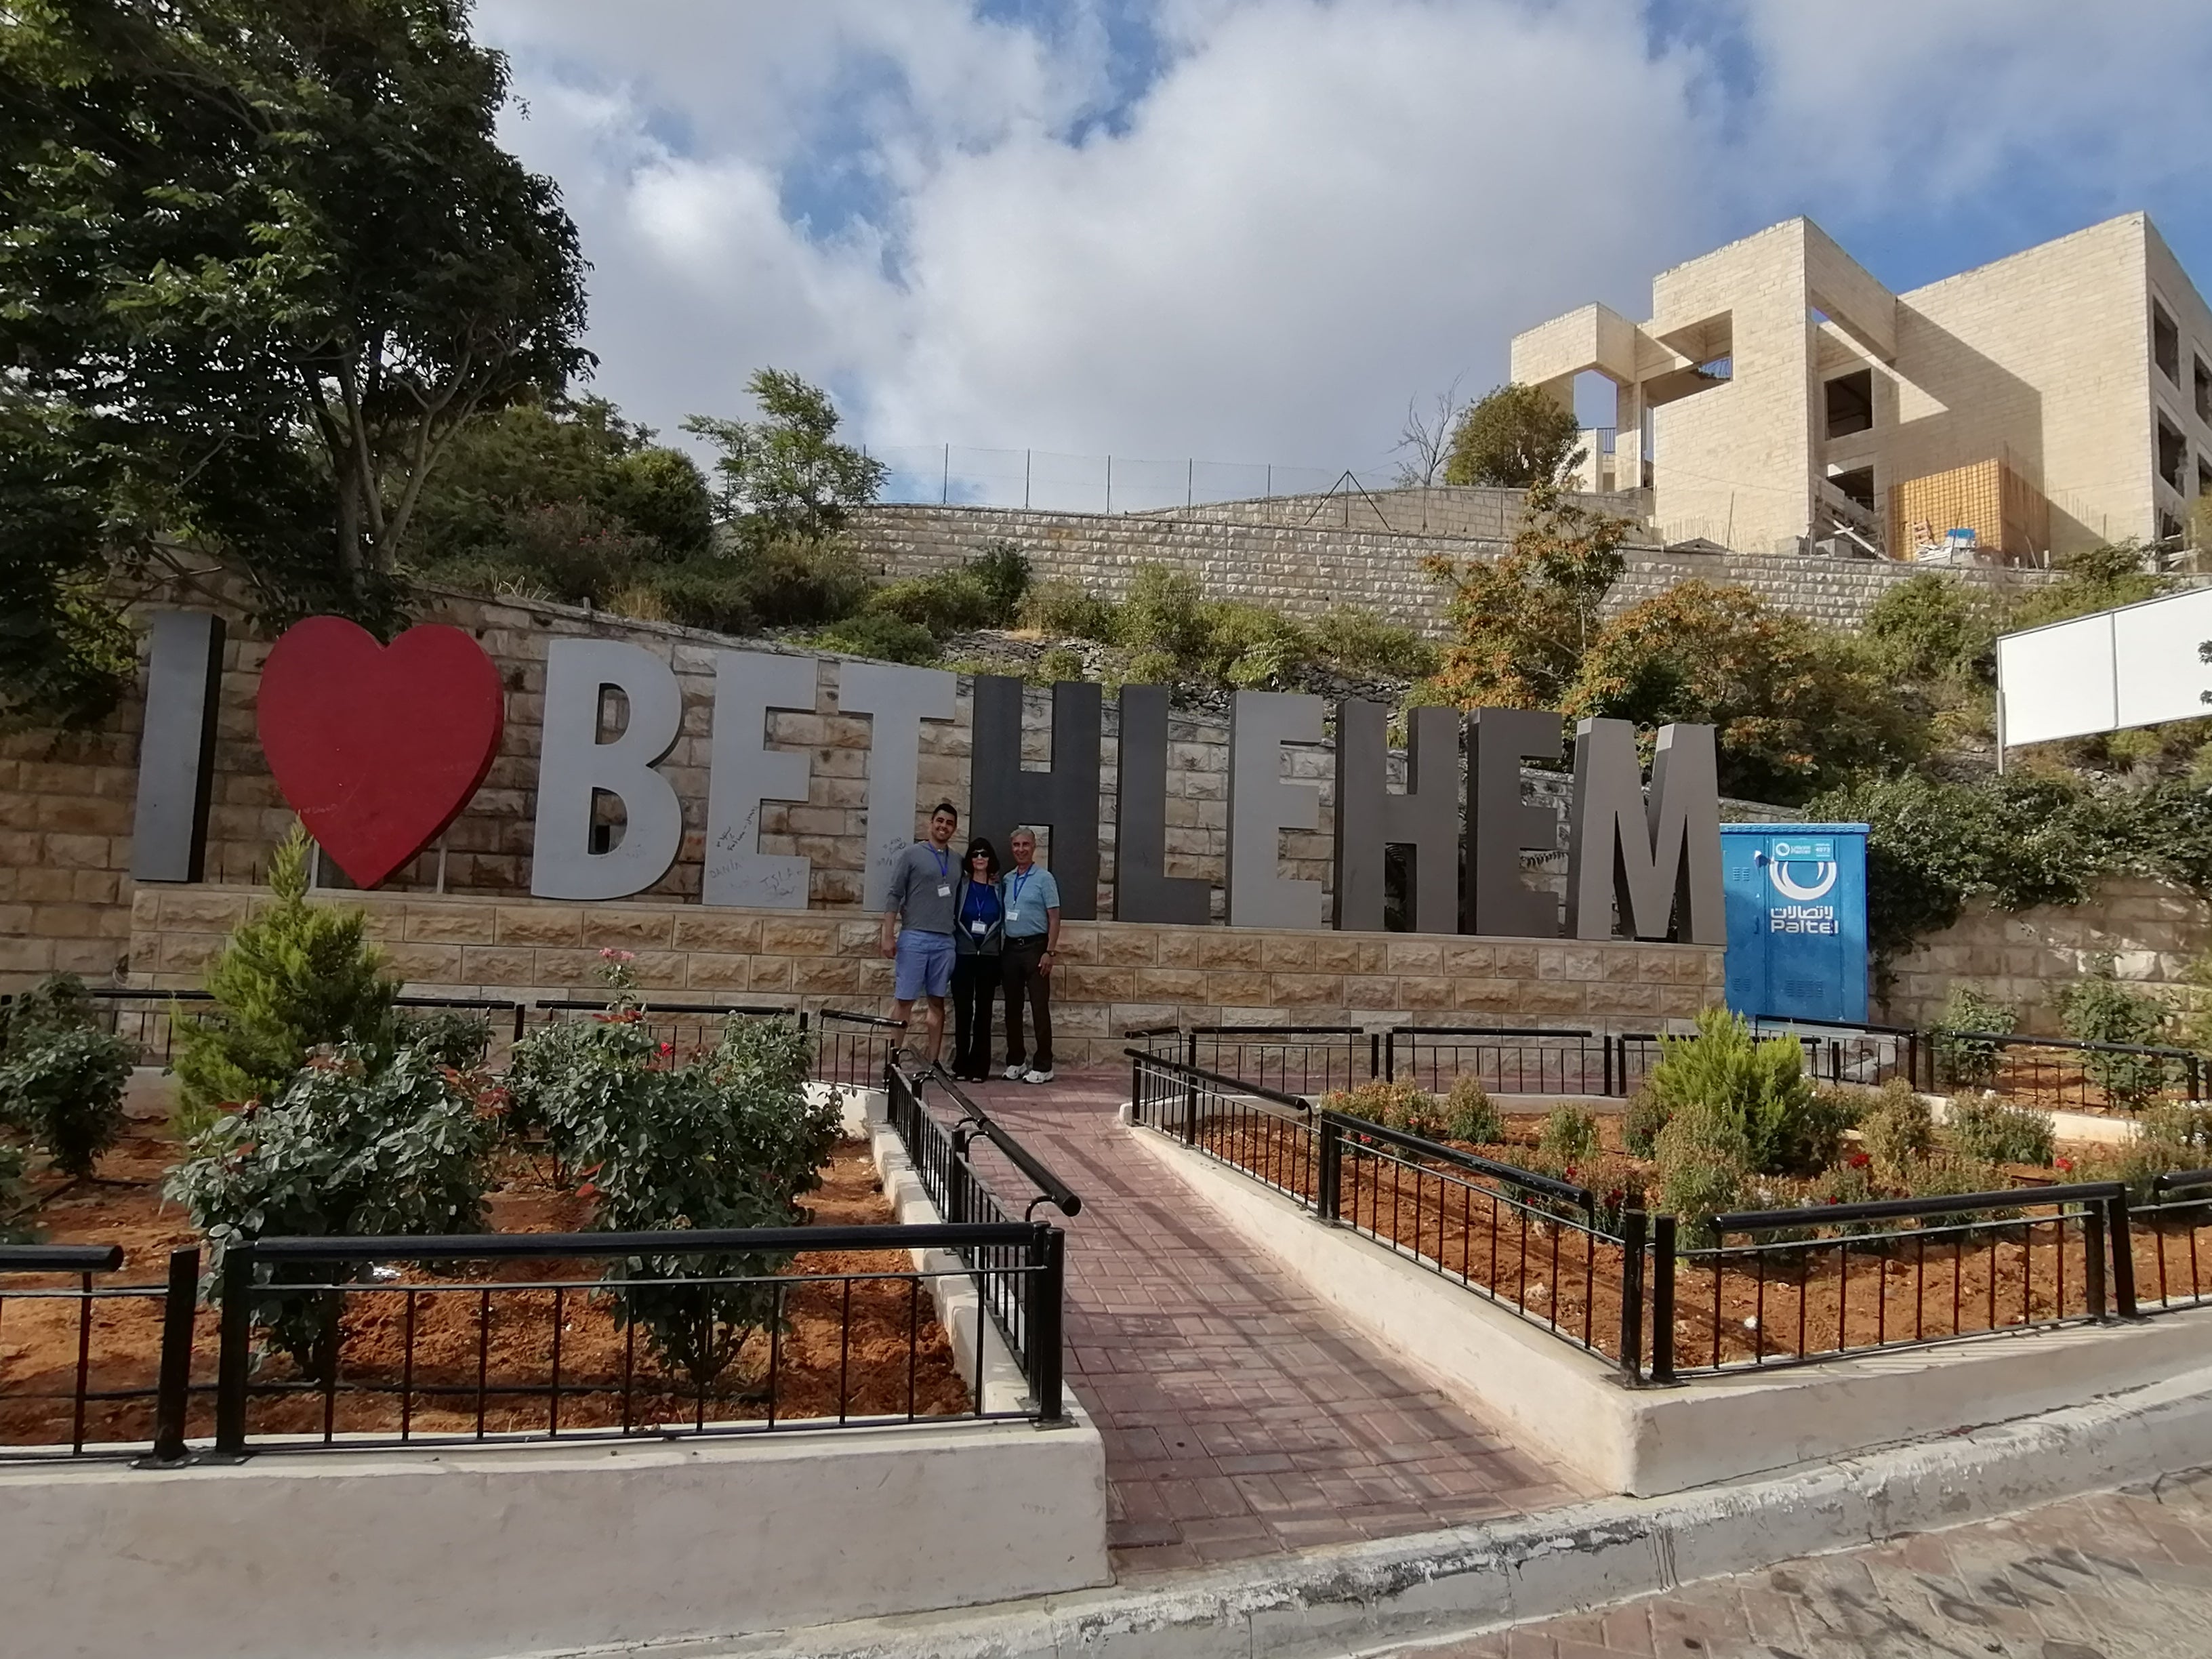 Guided tour to Bethlehem, group and shared trip from Jerusalem and Tel Aviv